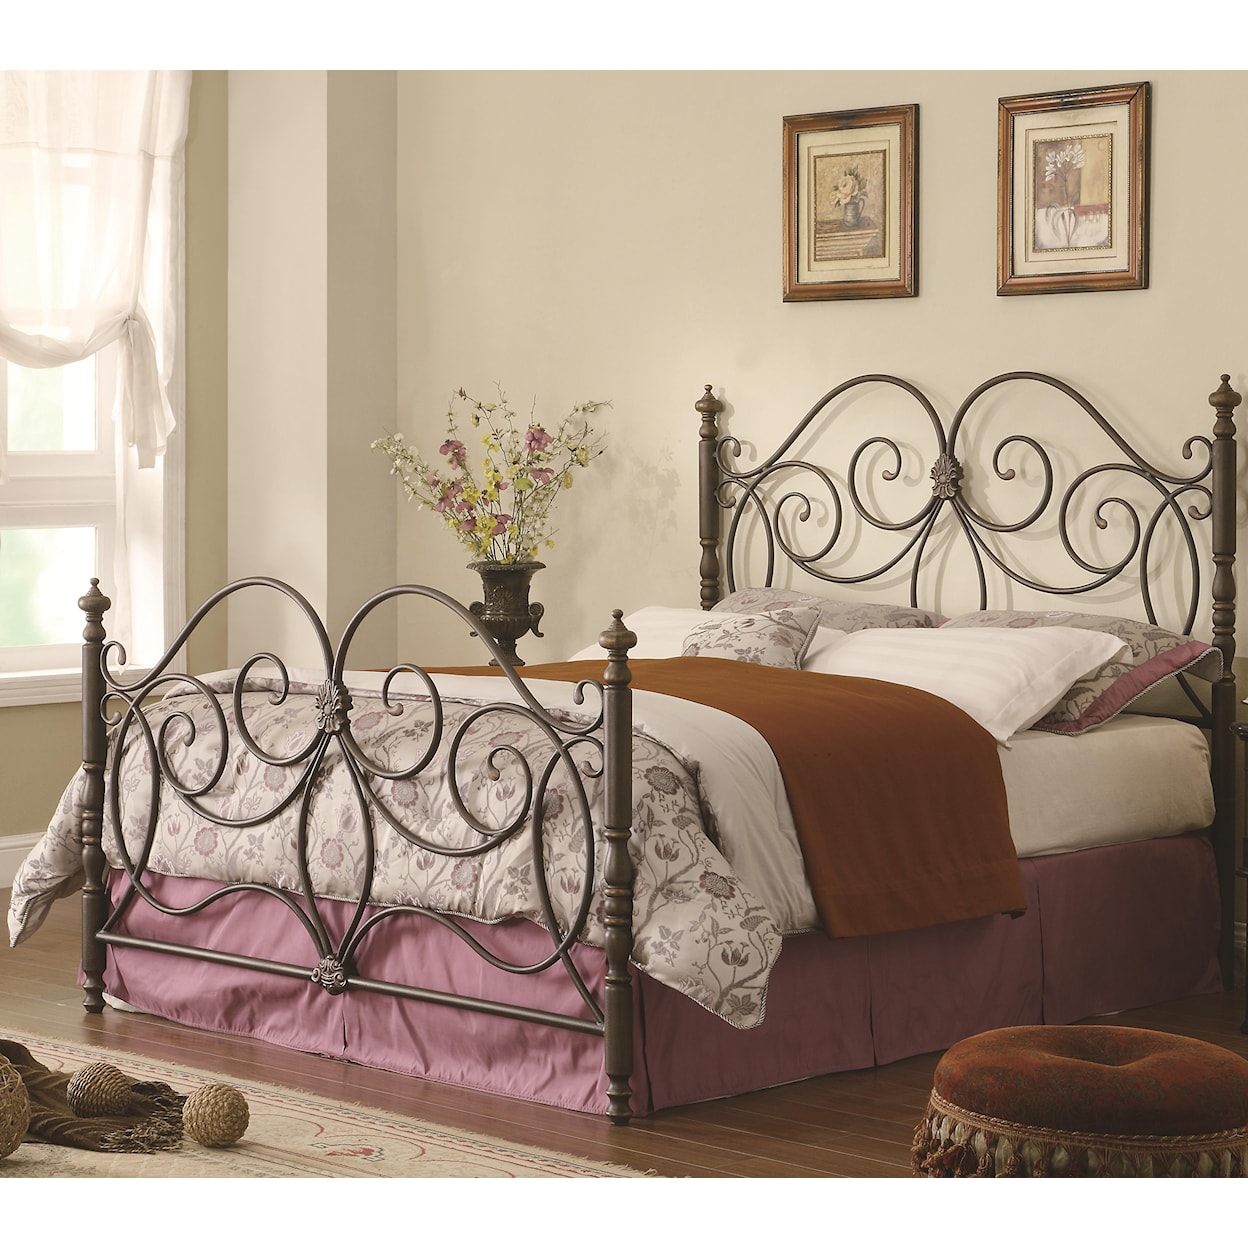 Michael Alan CSR Select Iron Beds and Headboards King Iron Bed